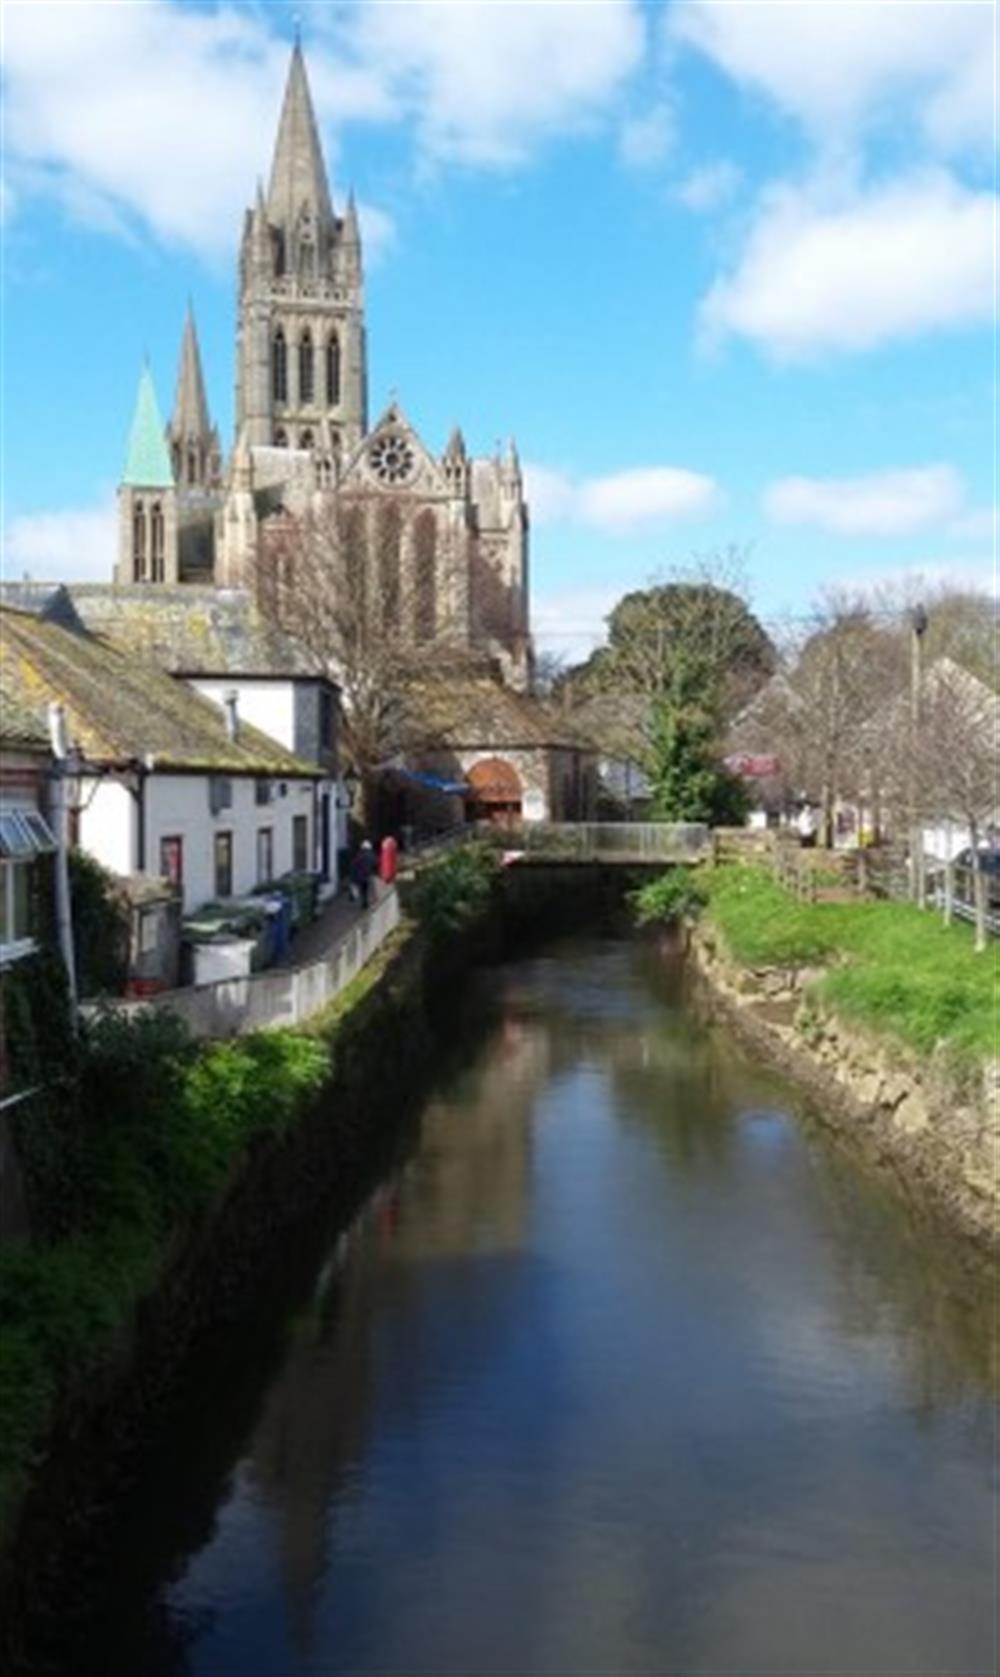 Truro is our main shopping centre. Pubs, cafes, restaurants and the beautiful cathedral.